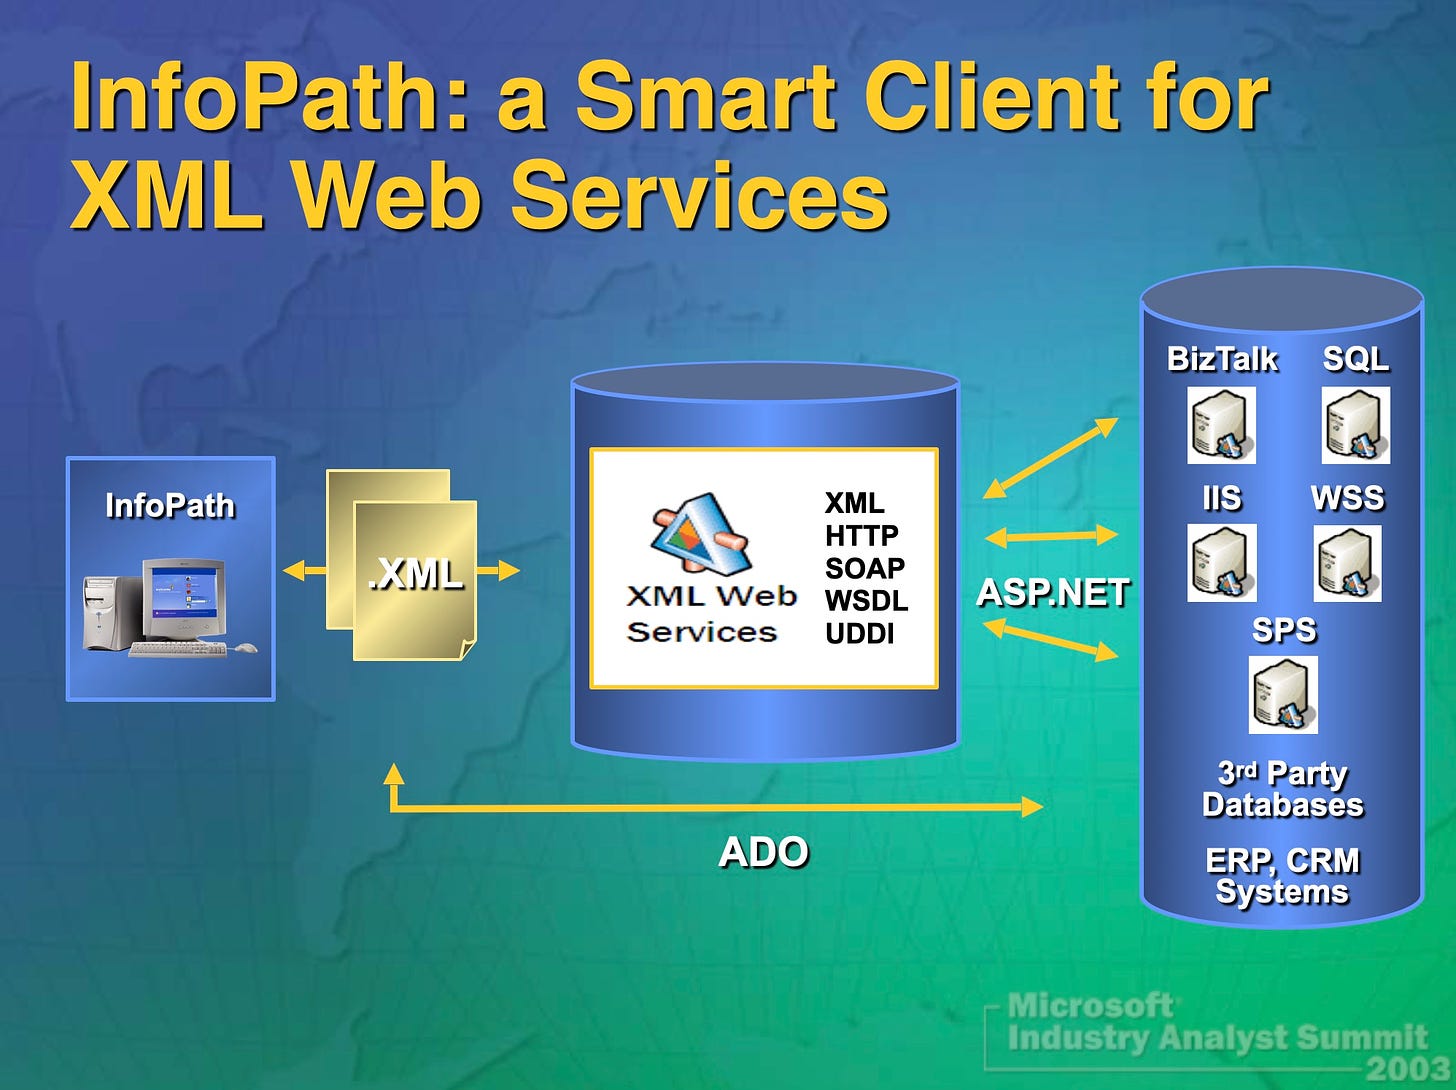 InfoPath: A Smart Client for XML Web Services. An architectural diagram showing the flow of information across the Microsoft product line.